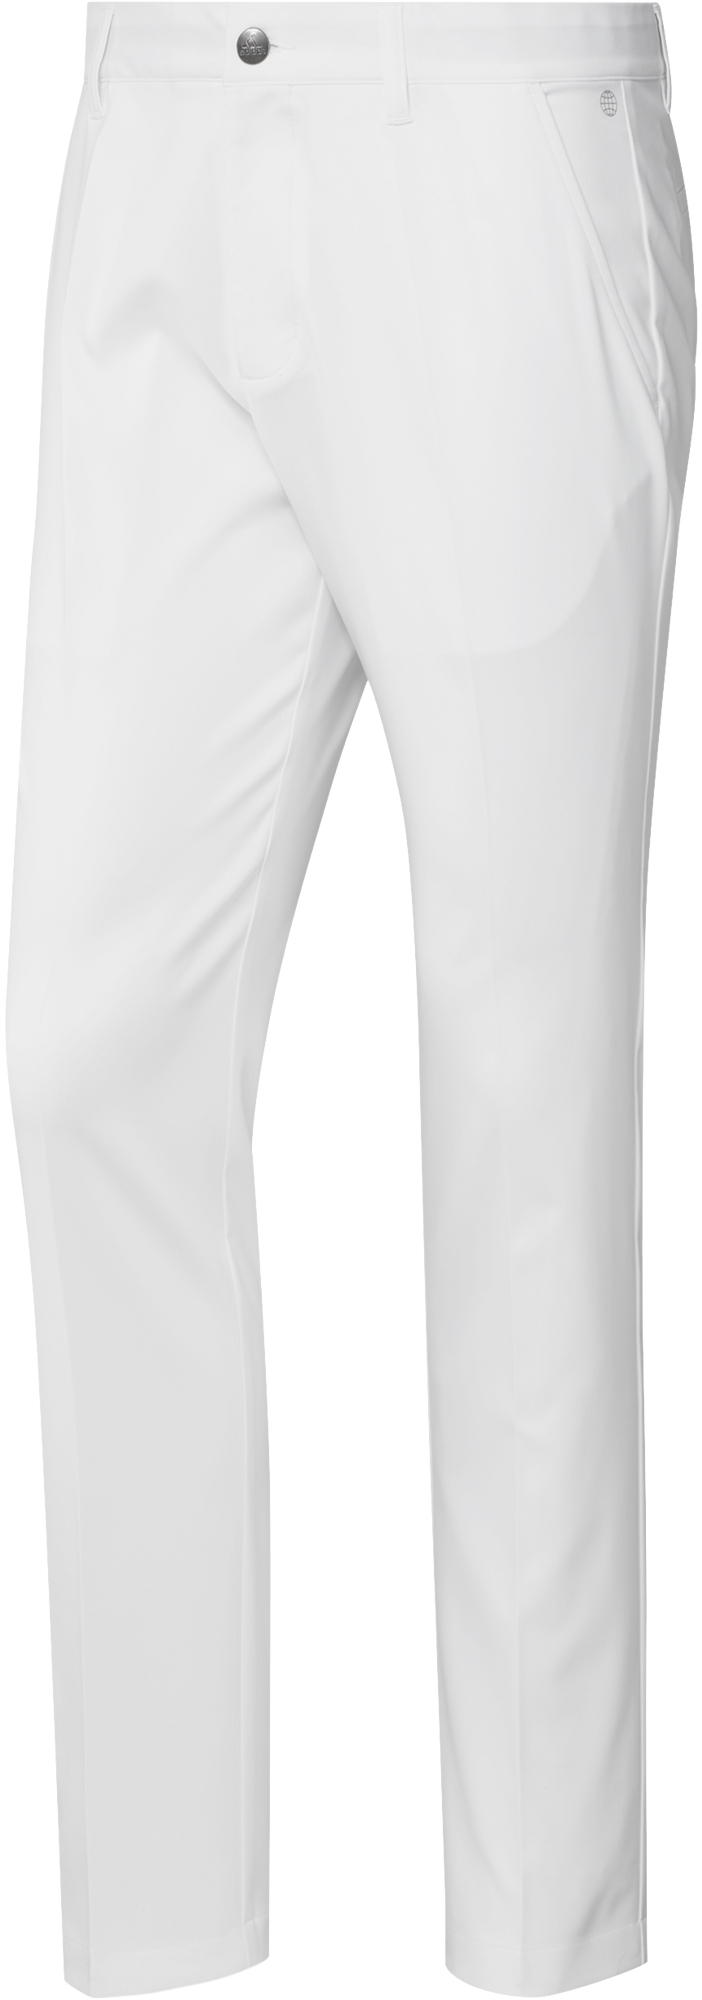 adidas Ultimate365 Primegreen Tapered Pant, white